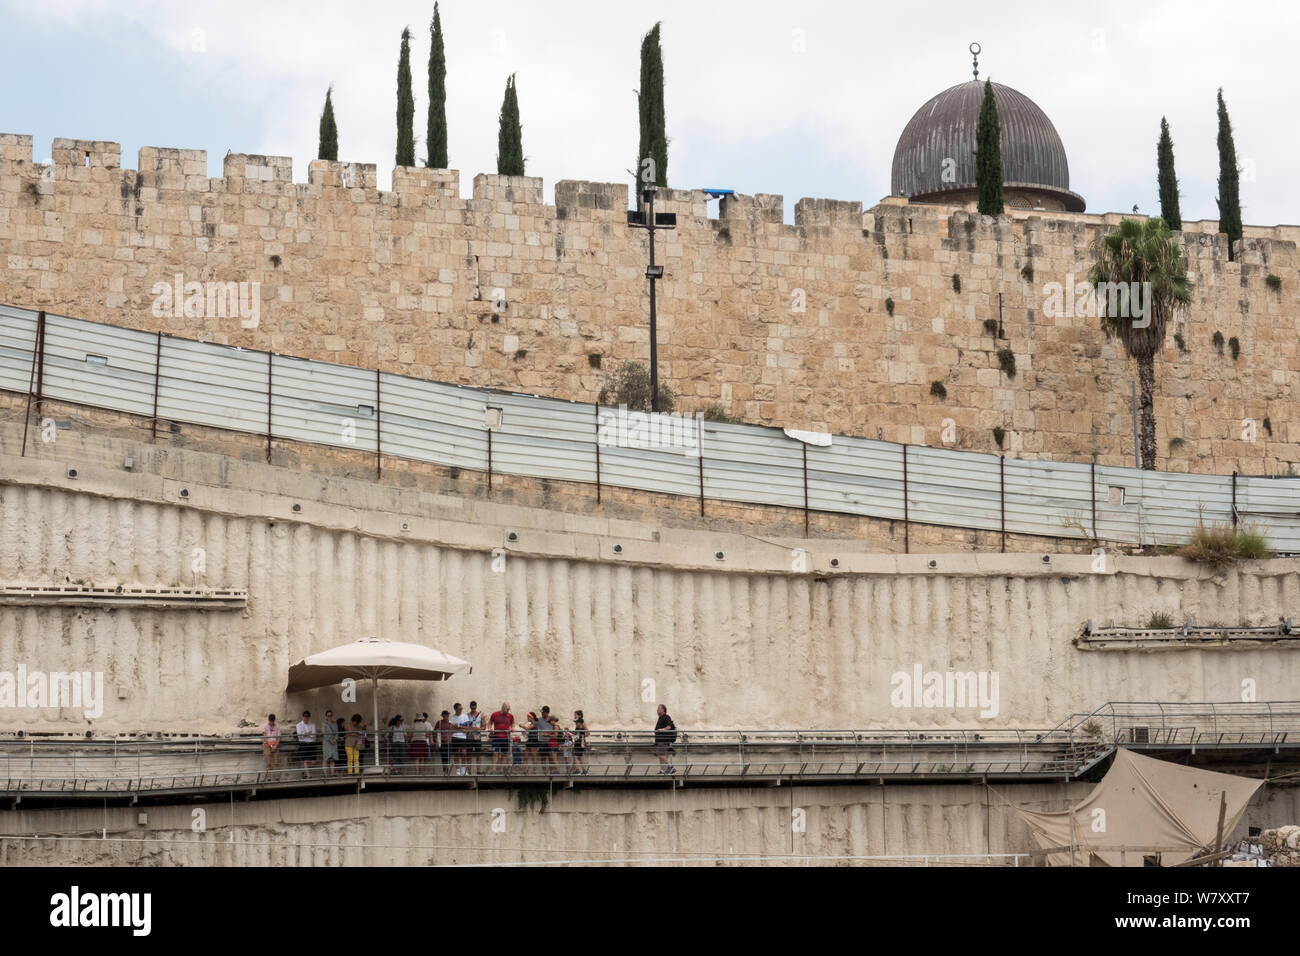 Jerusalem, Israel. 7th August, 2019. A northward view from the City of David depicts the Al Aqsa Mosque on the Temple Mount. The City of David is an archaeological site and home to a park and visitor center managed by the Ir David Foundation, also known as Elad. This association openly aims to strengthen Jewish connection to Jerusalem, create a Jewish majority in Arab neighborhoods of East Jerusalem and renew the Jewish community in the City of David, which is also part of the Arab neighborhood of Silwan. The City of David is speculated to be the original urban core of ancient Jerusalem. Relig Stock Photo